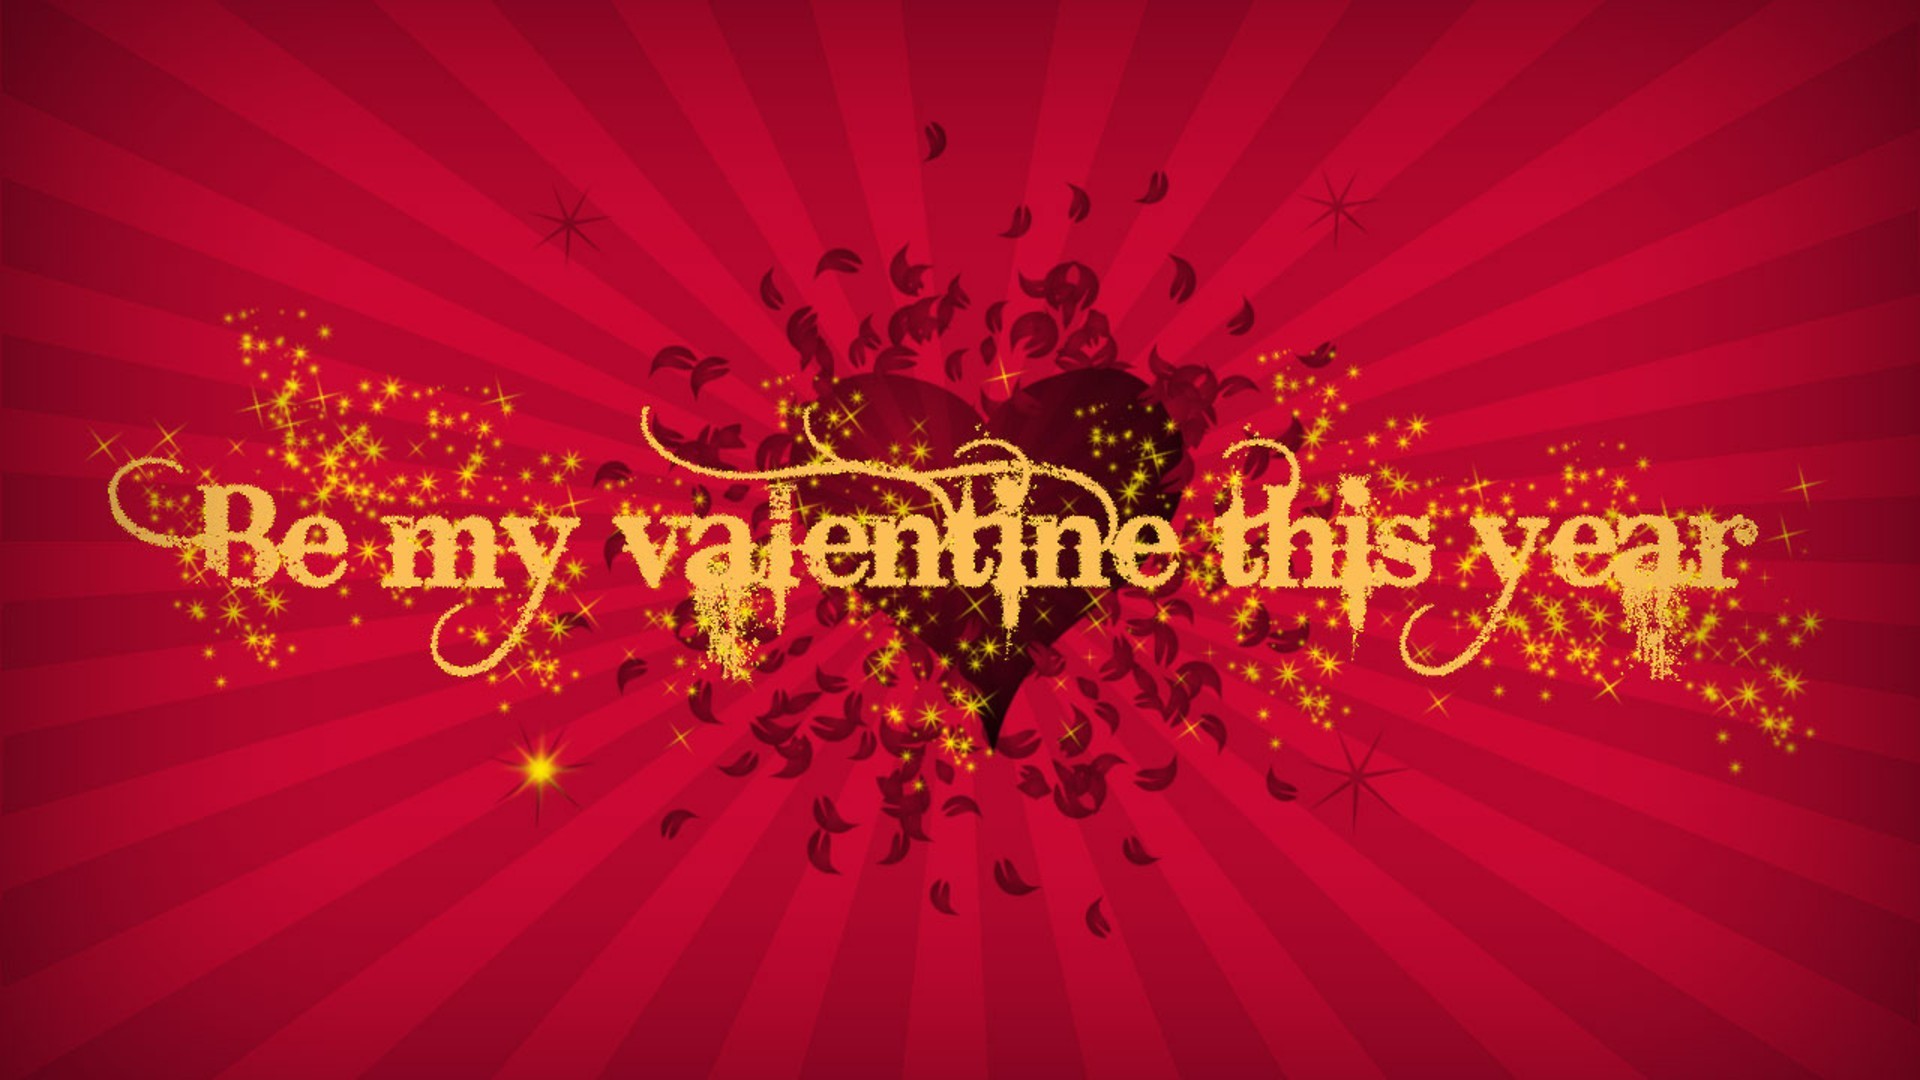 1920x1080 Valentines Day Images 2018: Wallpapers, Pictures, HD Photos, ...